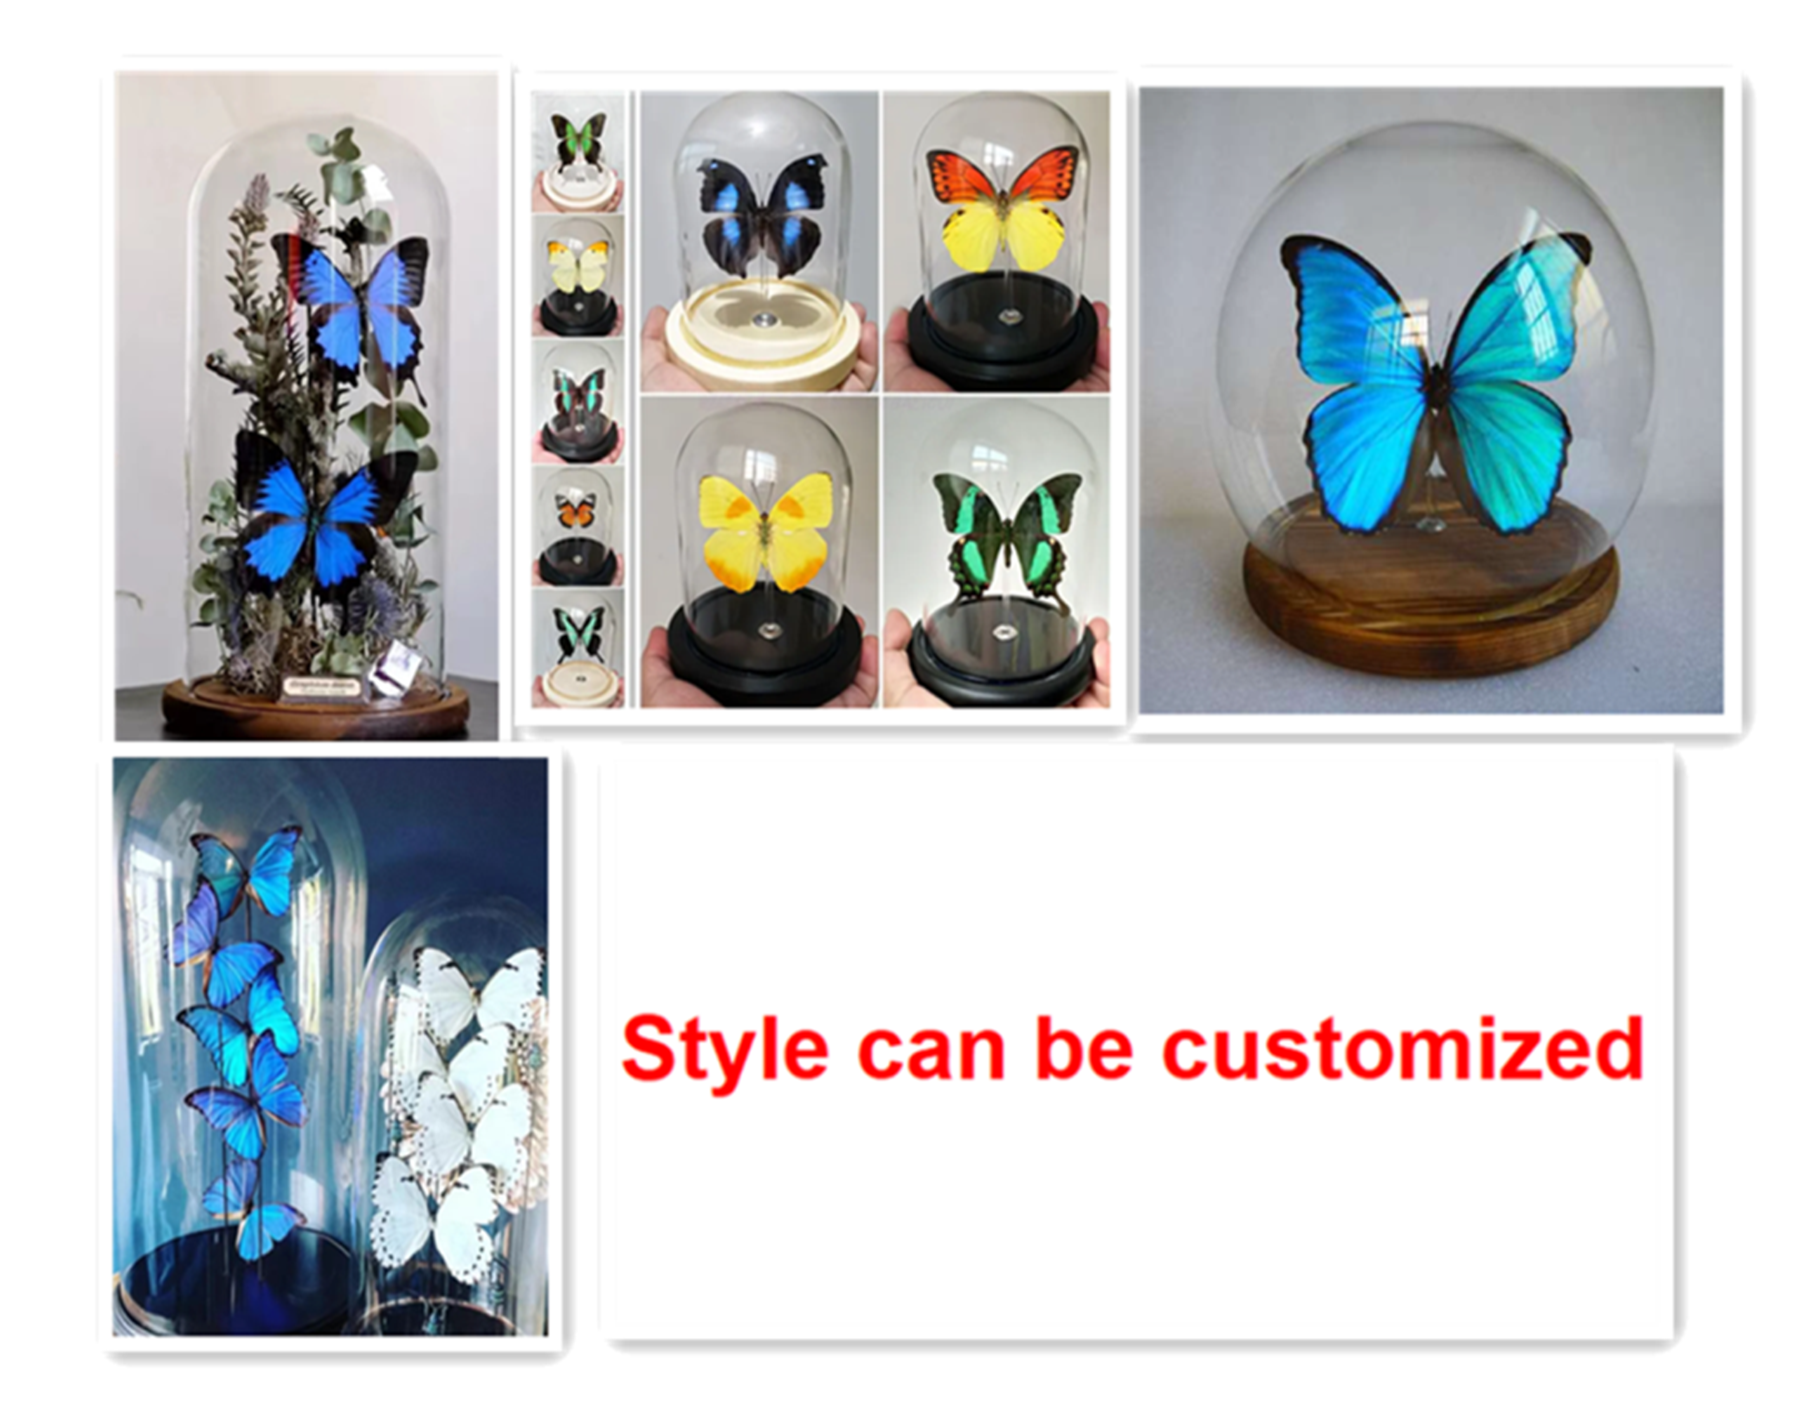 Hamadryas Feronia & Blue Cracker Butterfly Suppliers & Wholesalers - CF Butterfly